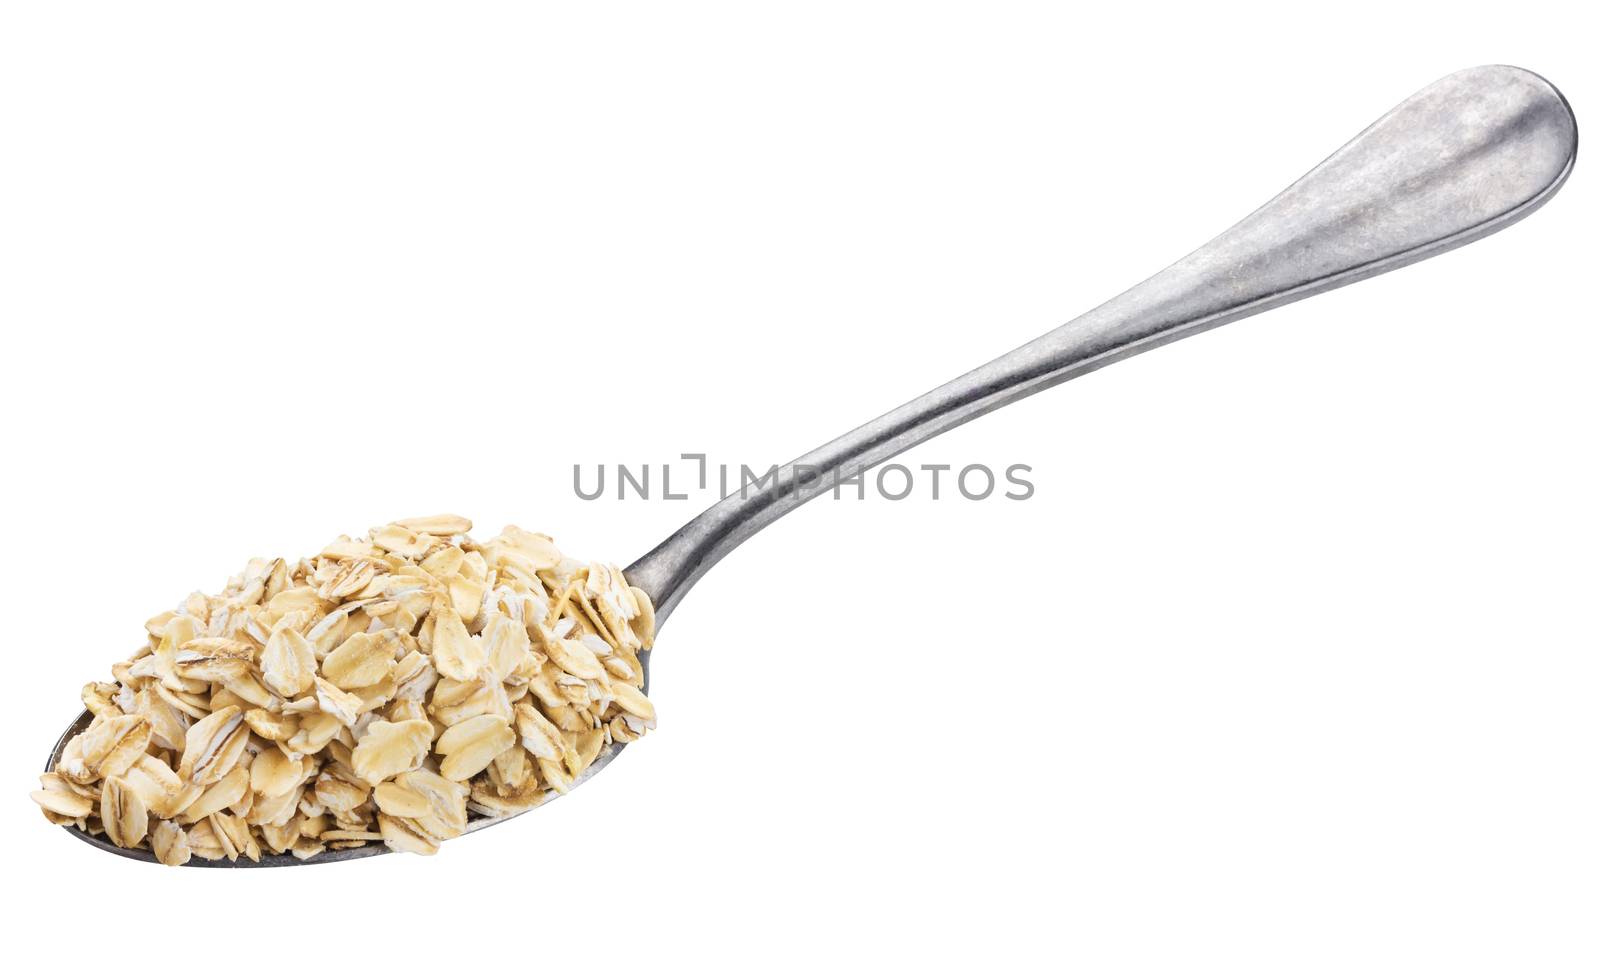 Oat flakes in spoon isolated on white background by xamtiw